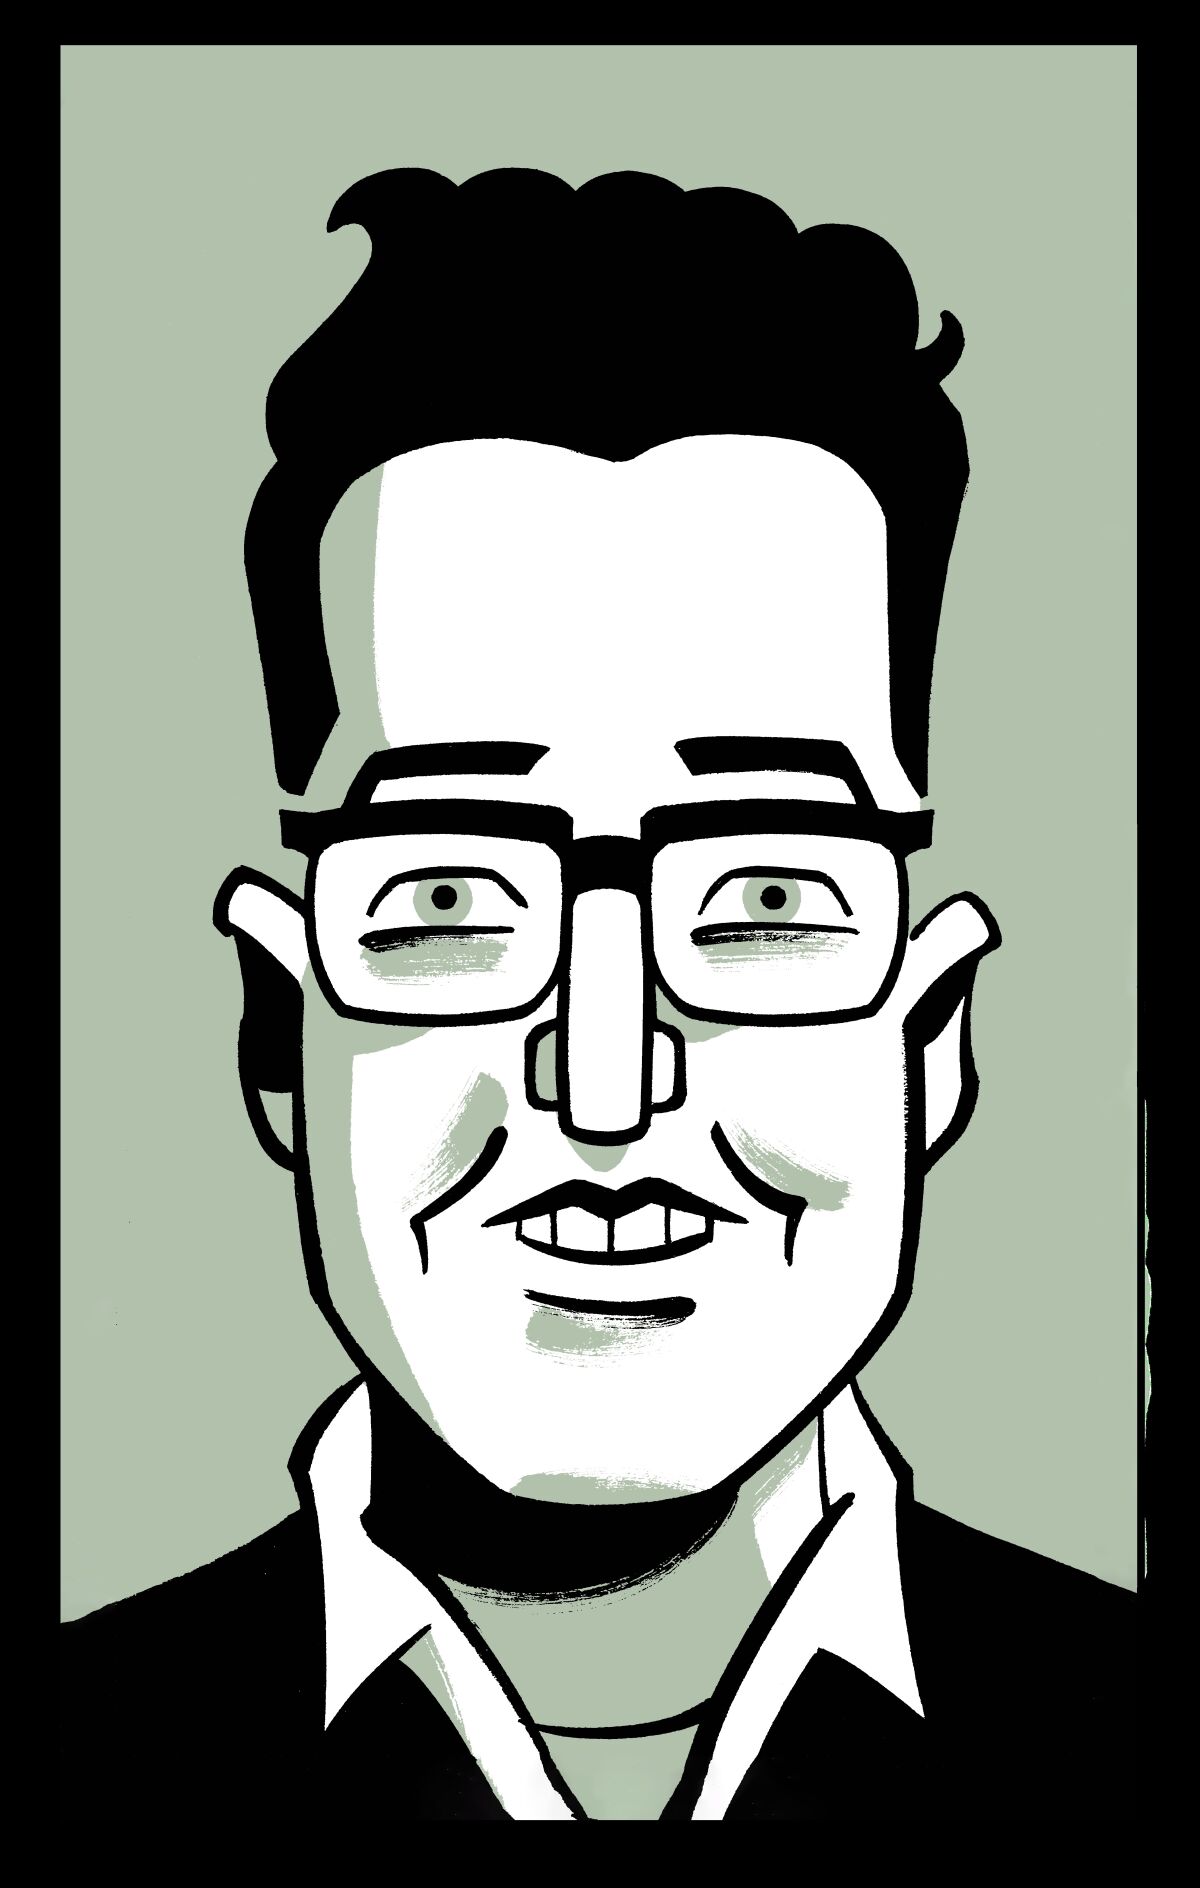 A drawing of a man with wavy hair, wearing glasses